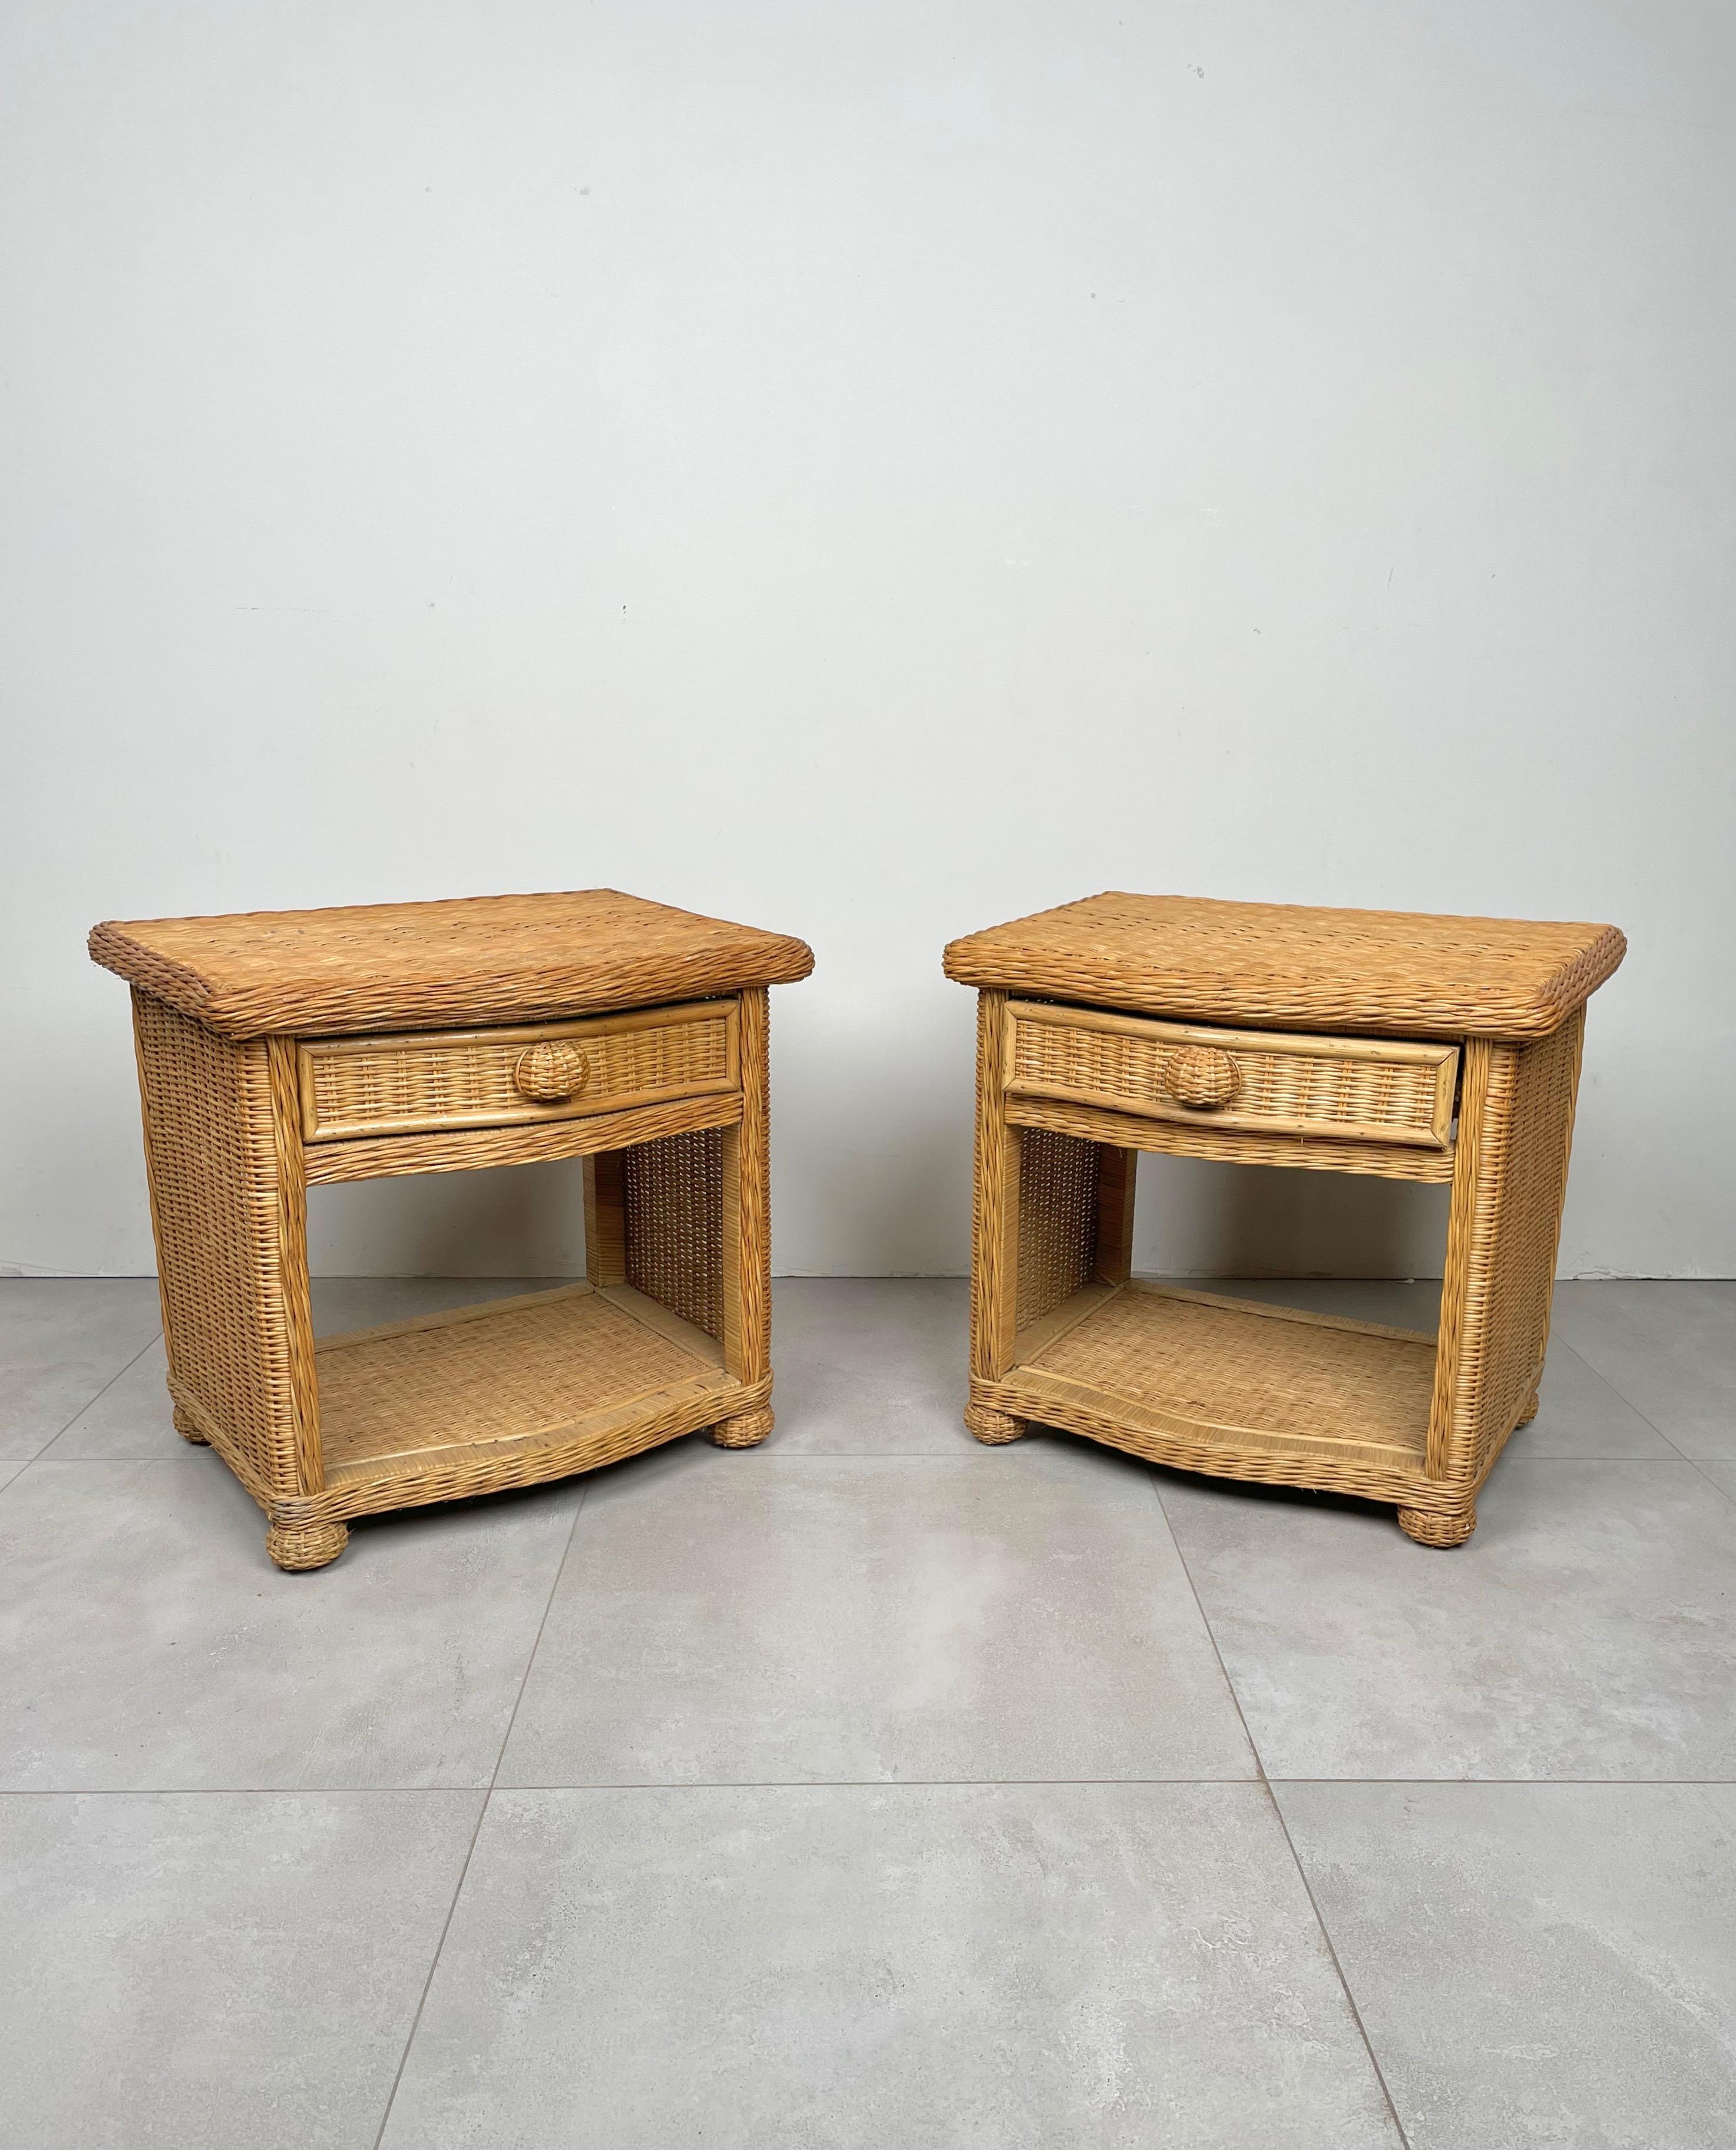 Italian Pair of Bed Side Tables Rattan & Wicker Attributed to Vivai Del Sud, Italy 1970s